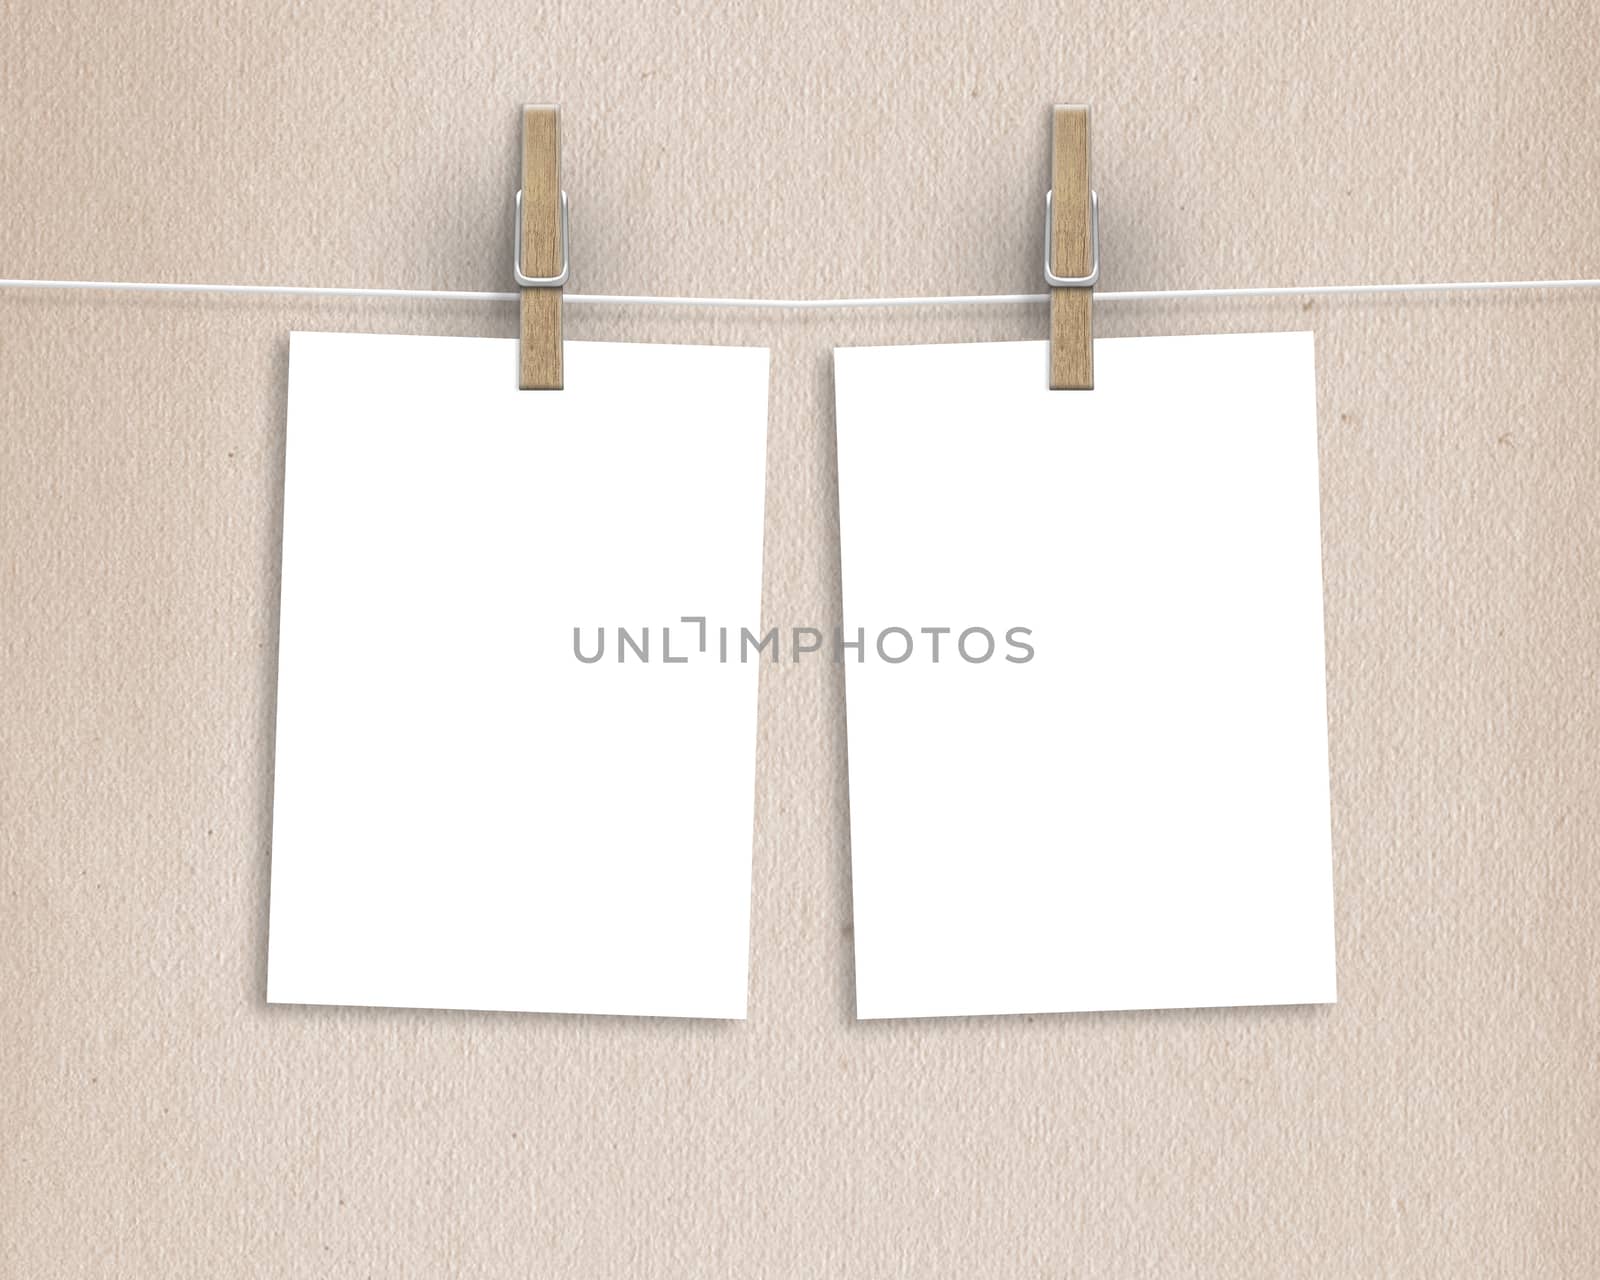 Paper cards hanging on a clothesline with clothespins on light background by boys1983@mail.ru